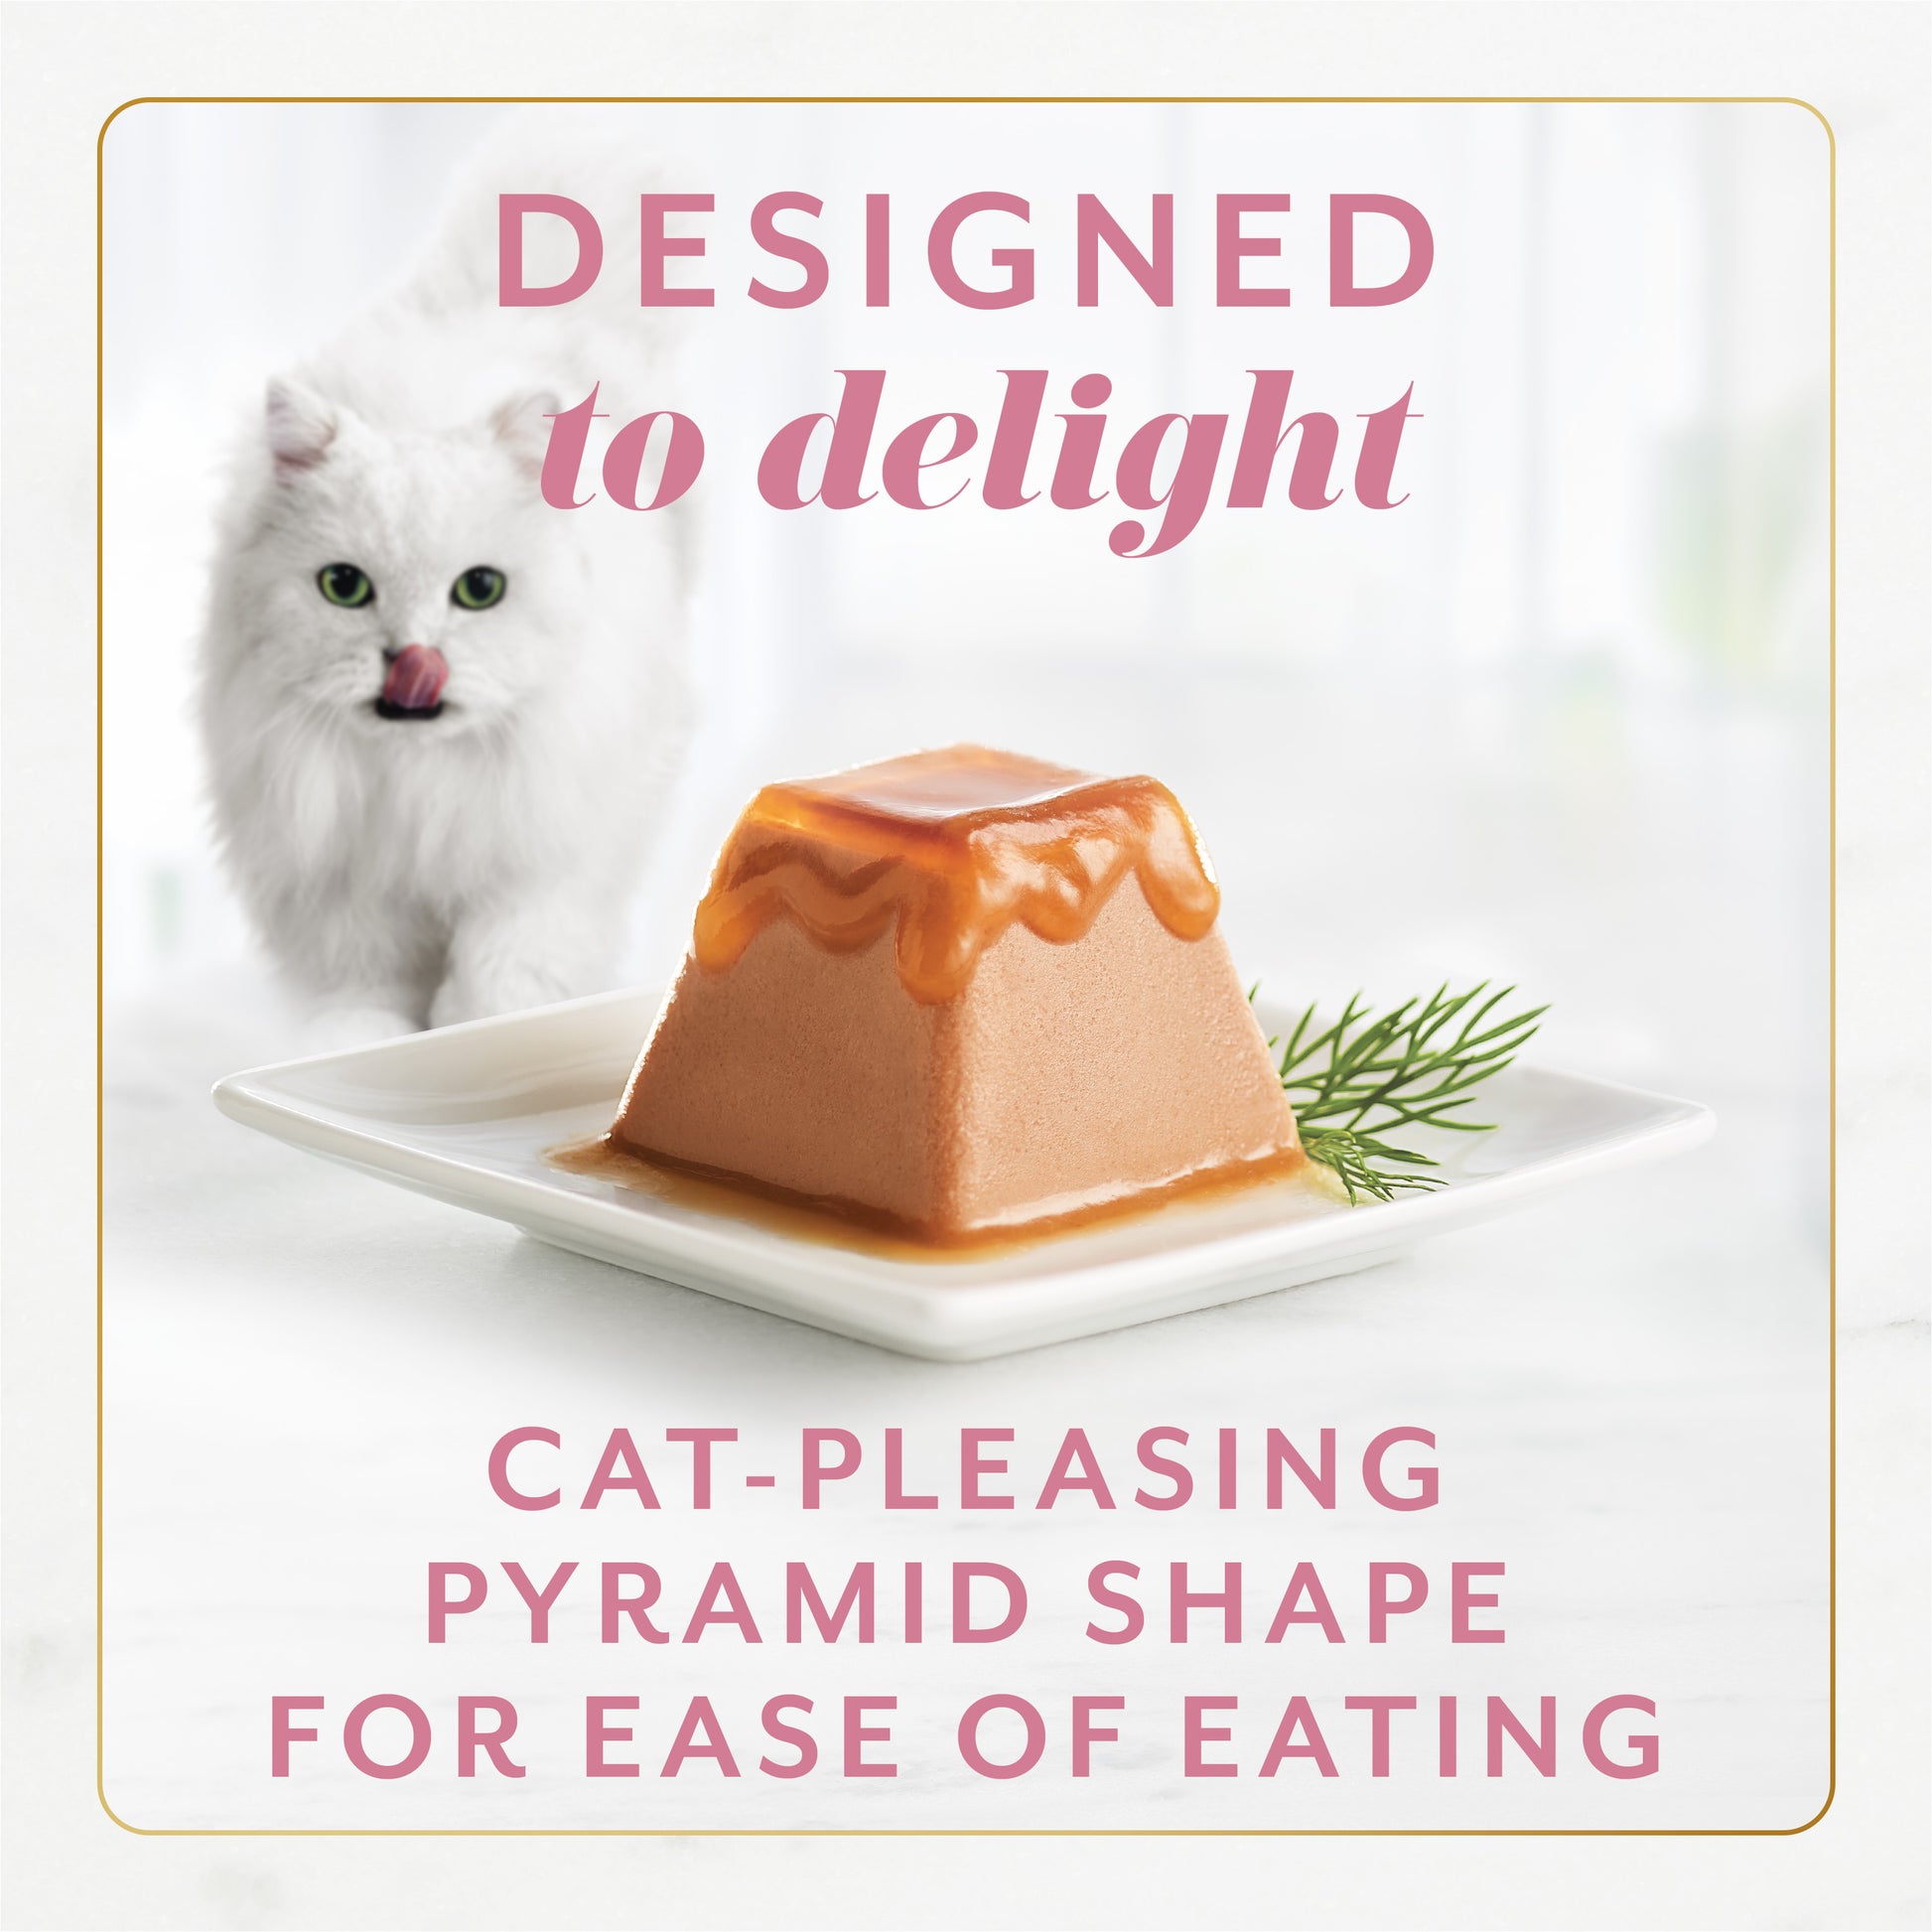 Designed to delight. Cat-pleasing pyramid shape for ease of eating